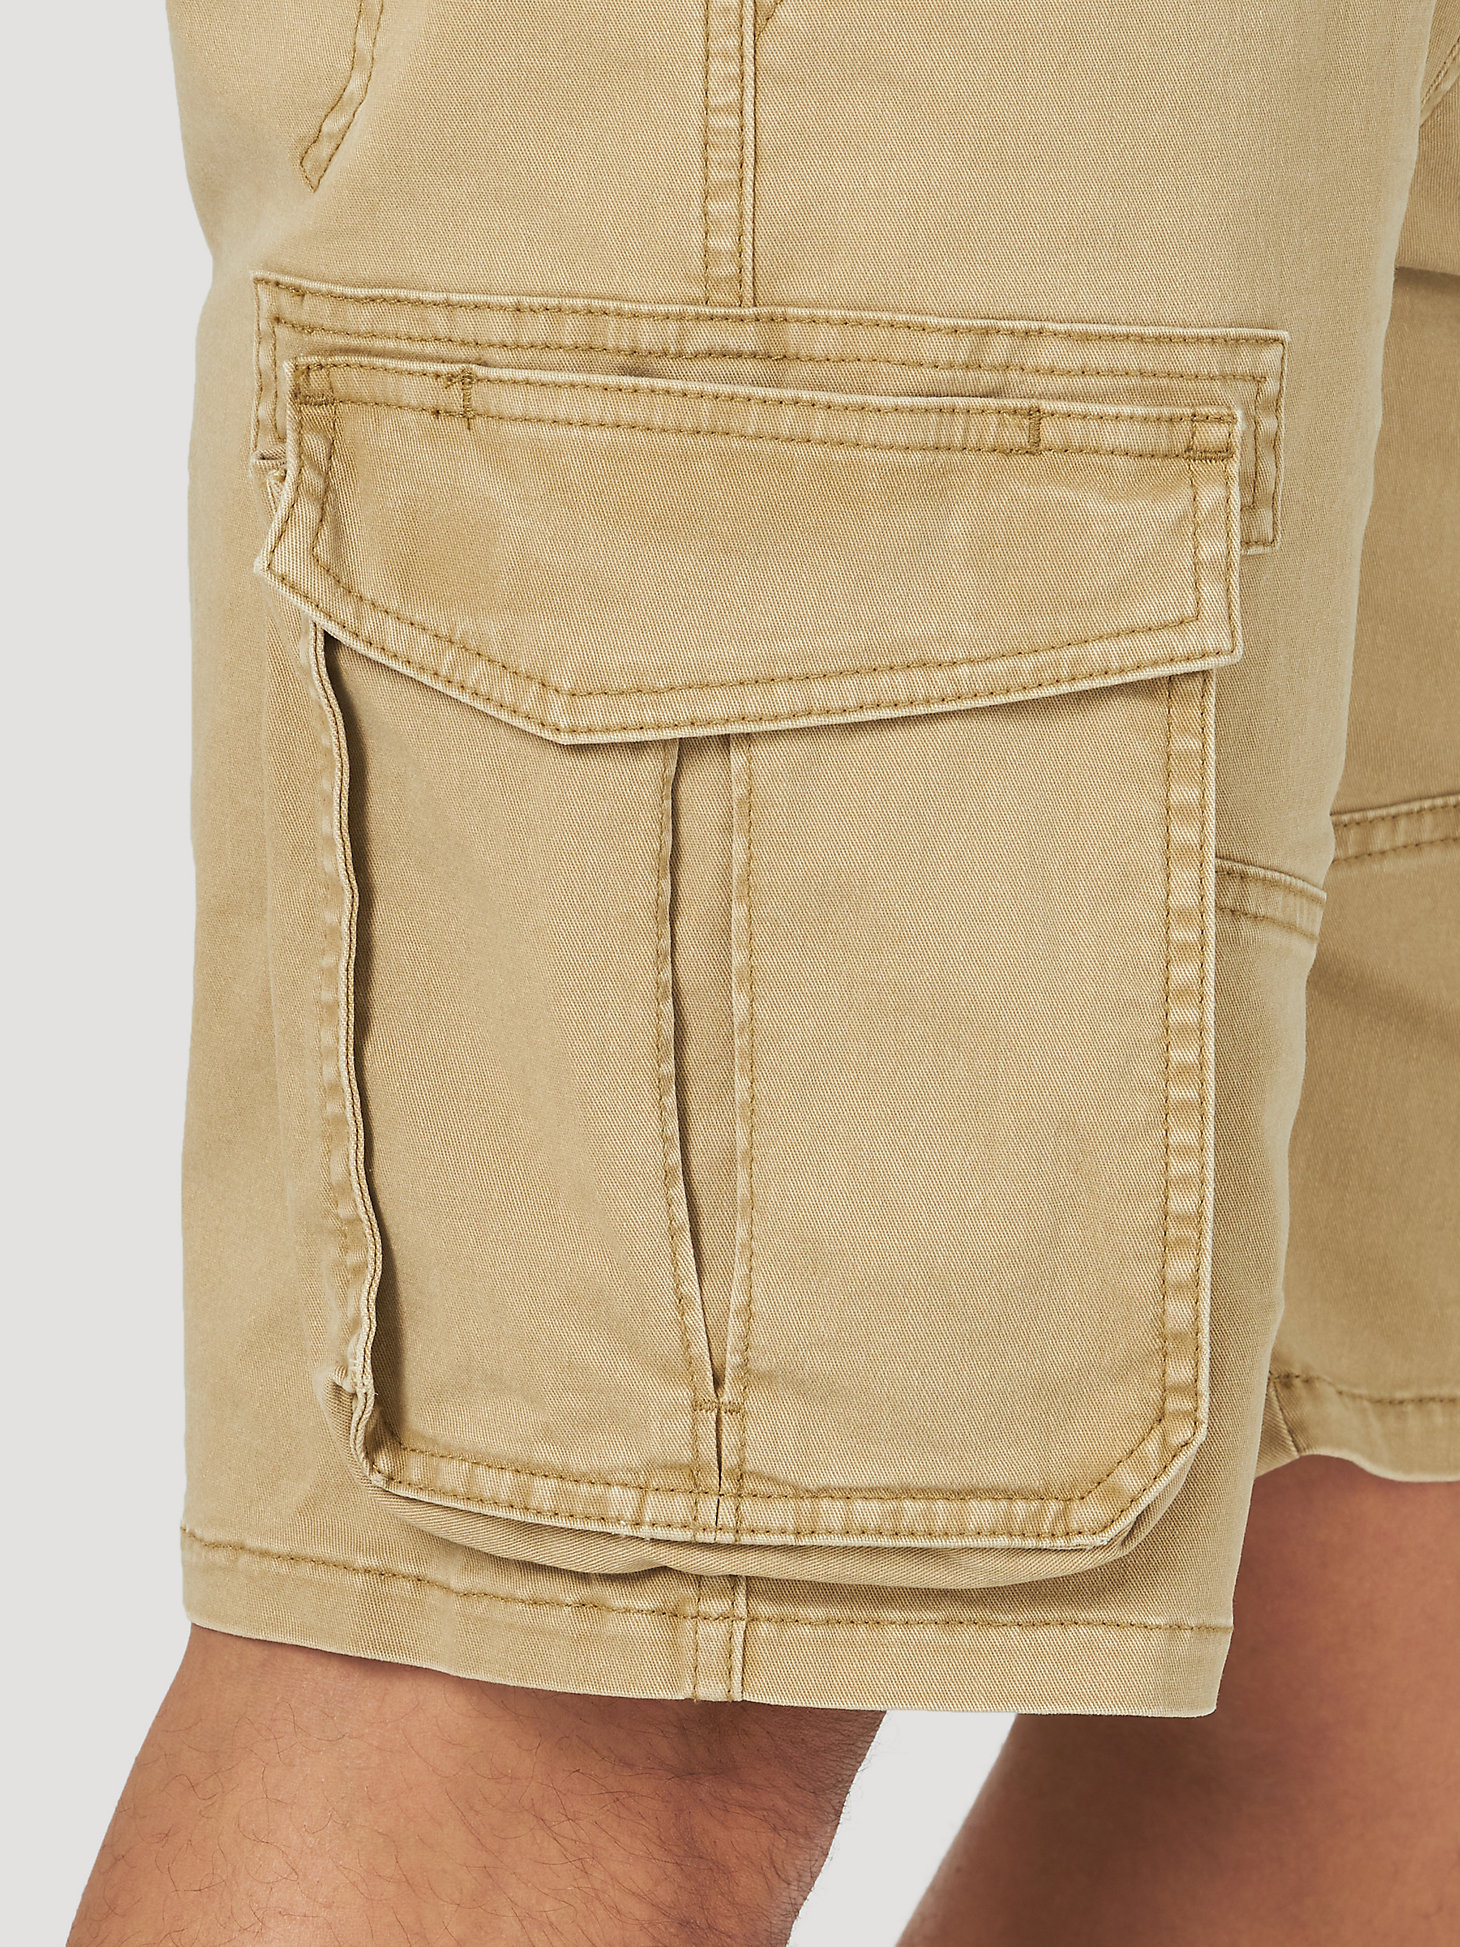 Men's Free To Stretch™ Relaxed Fit Cargo Short in Timber alternative view 6